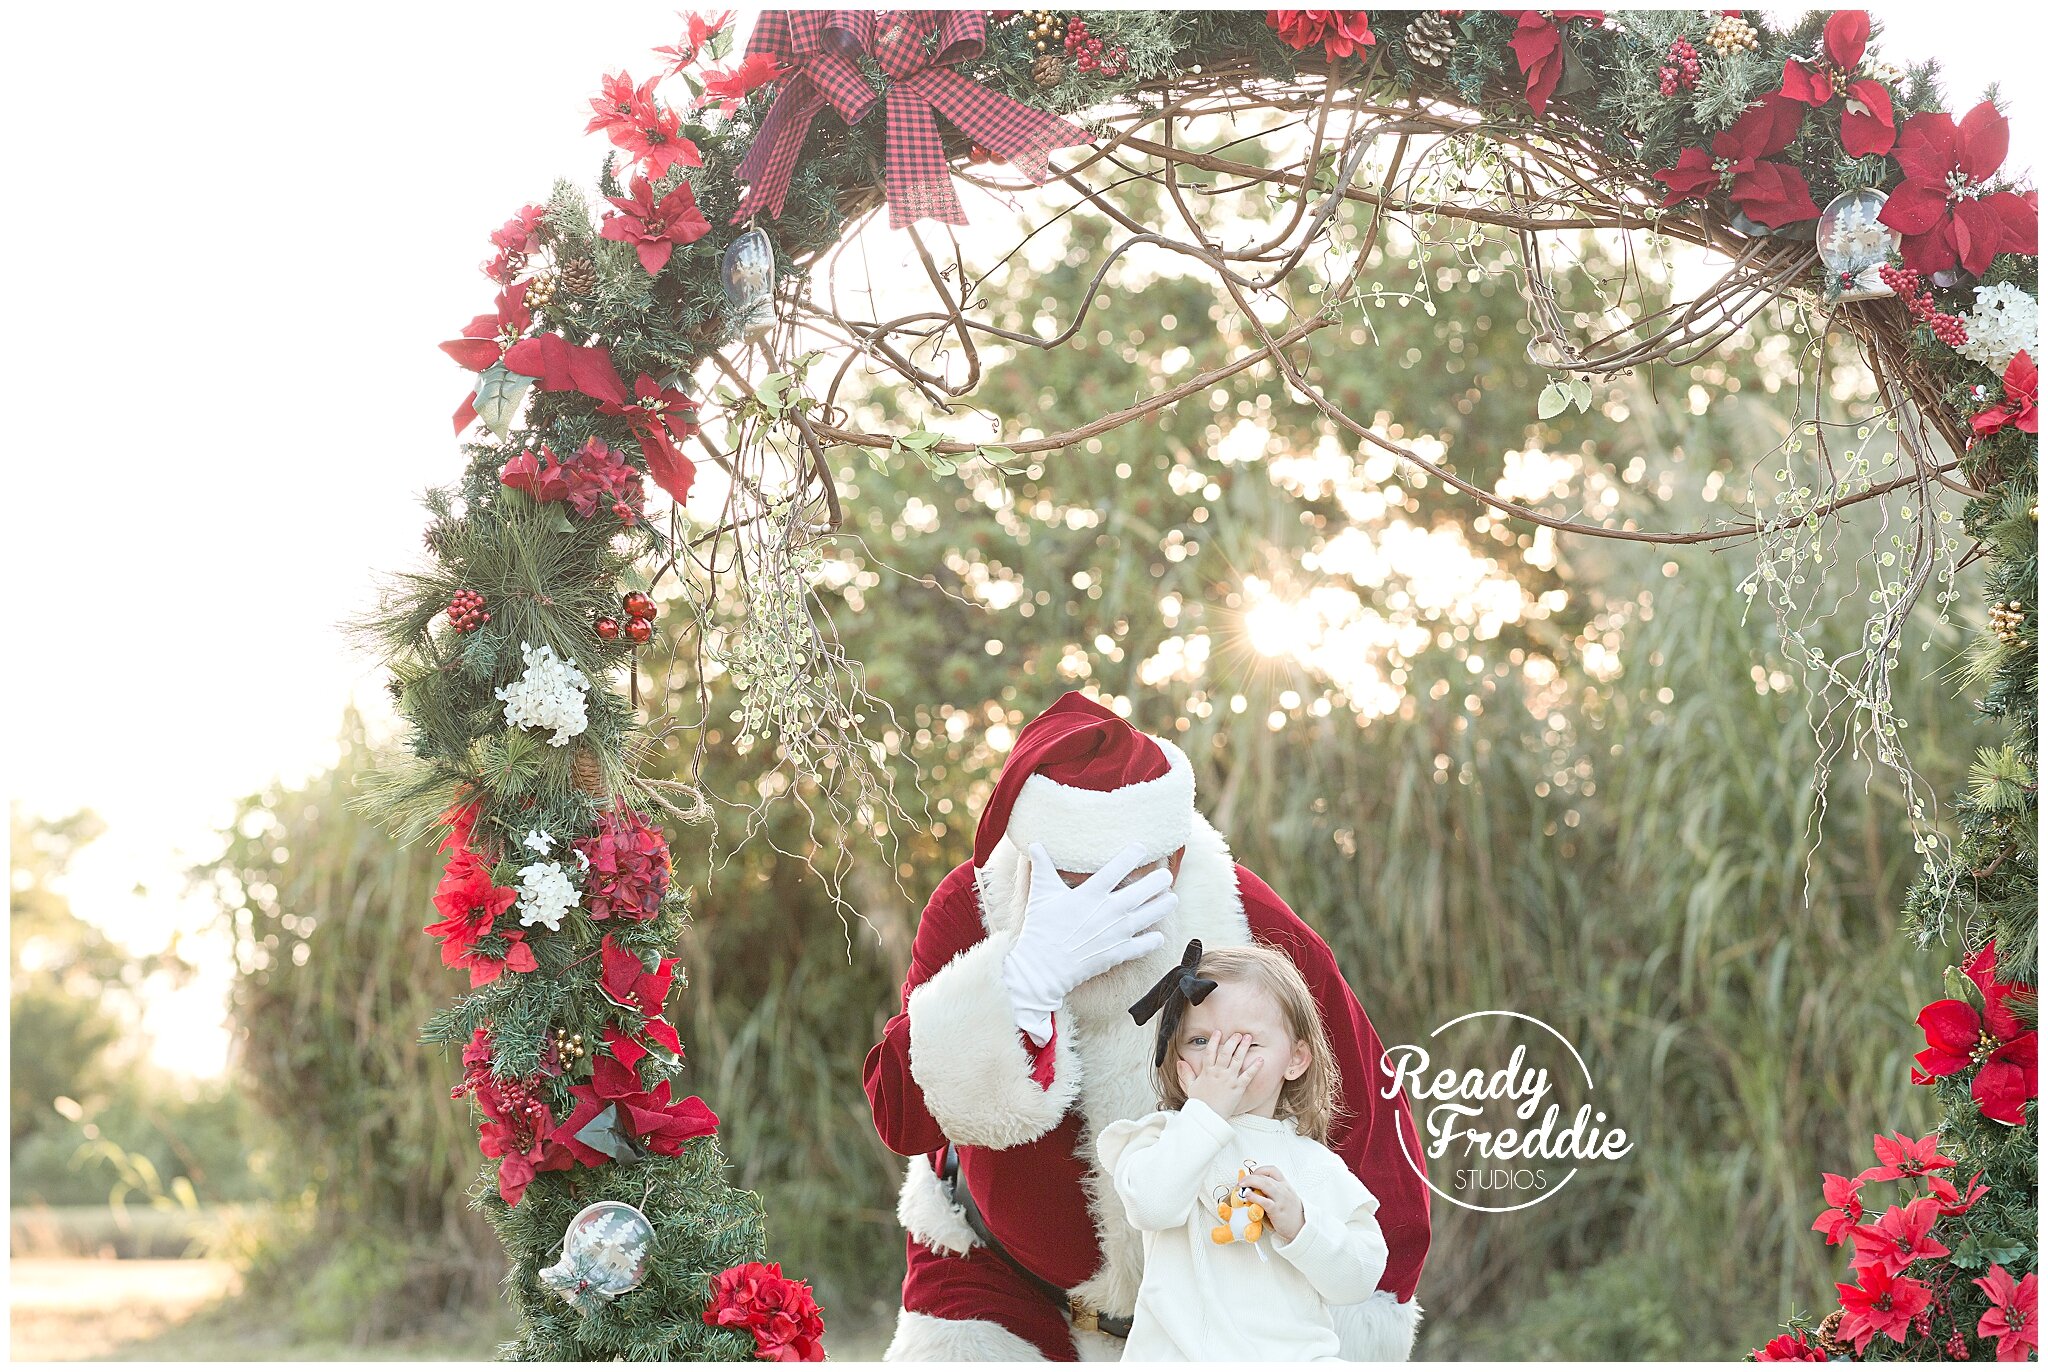 Funny pictures with Santa - face palm photo with Santa  | Ready Freddie Studios Miami, FL